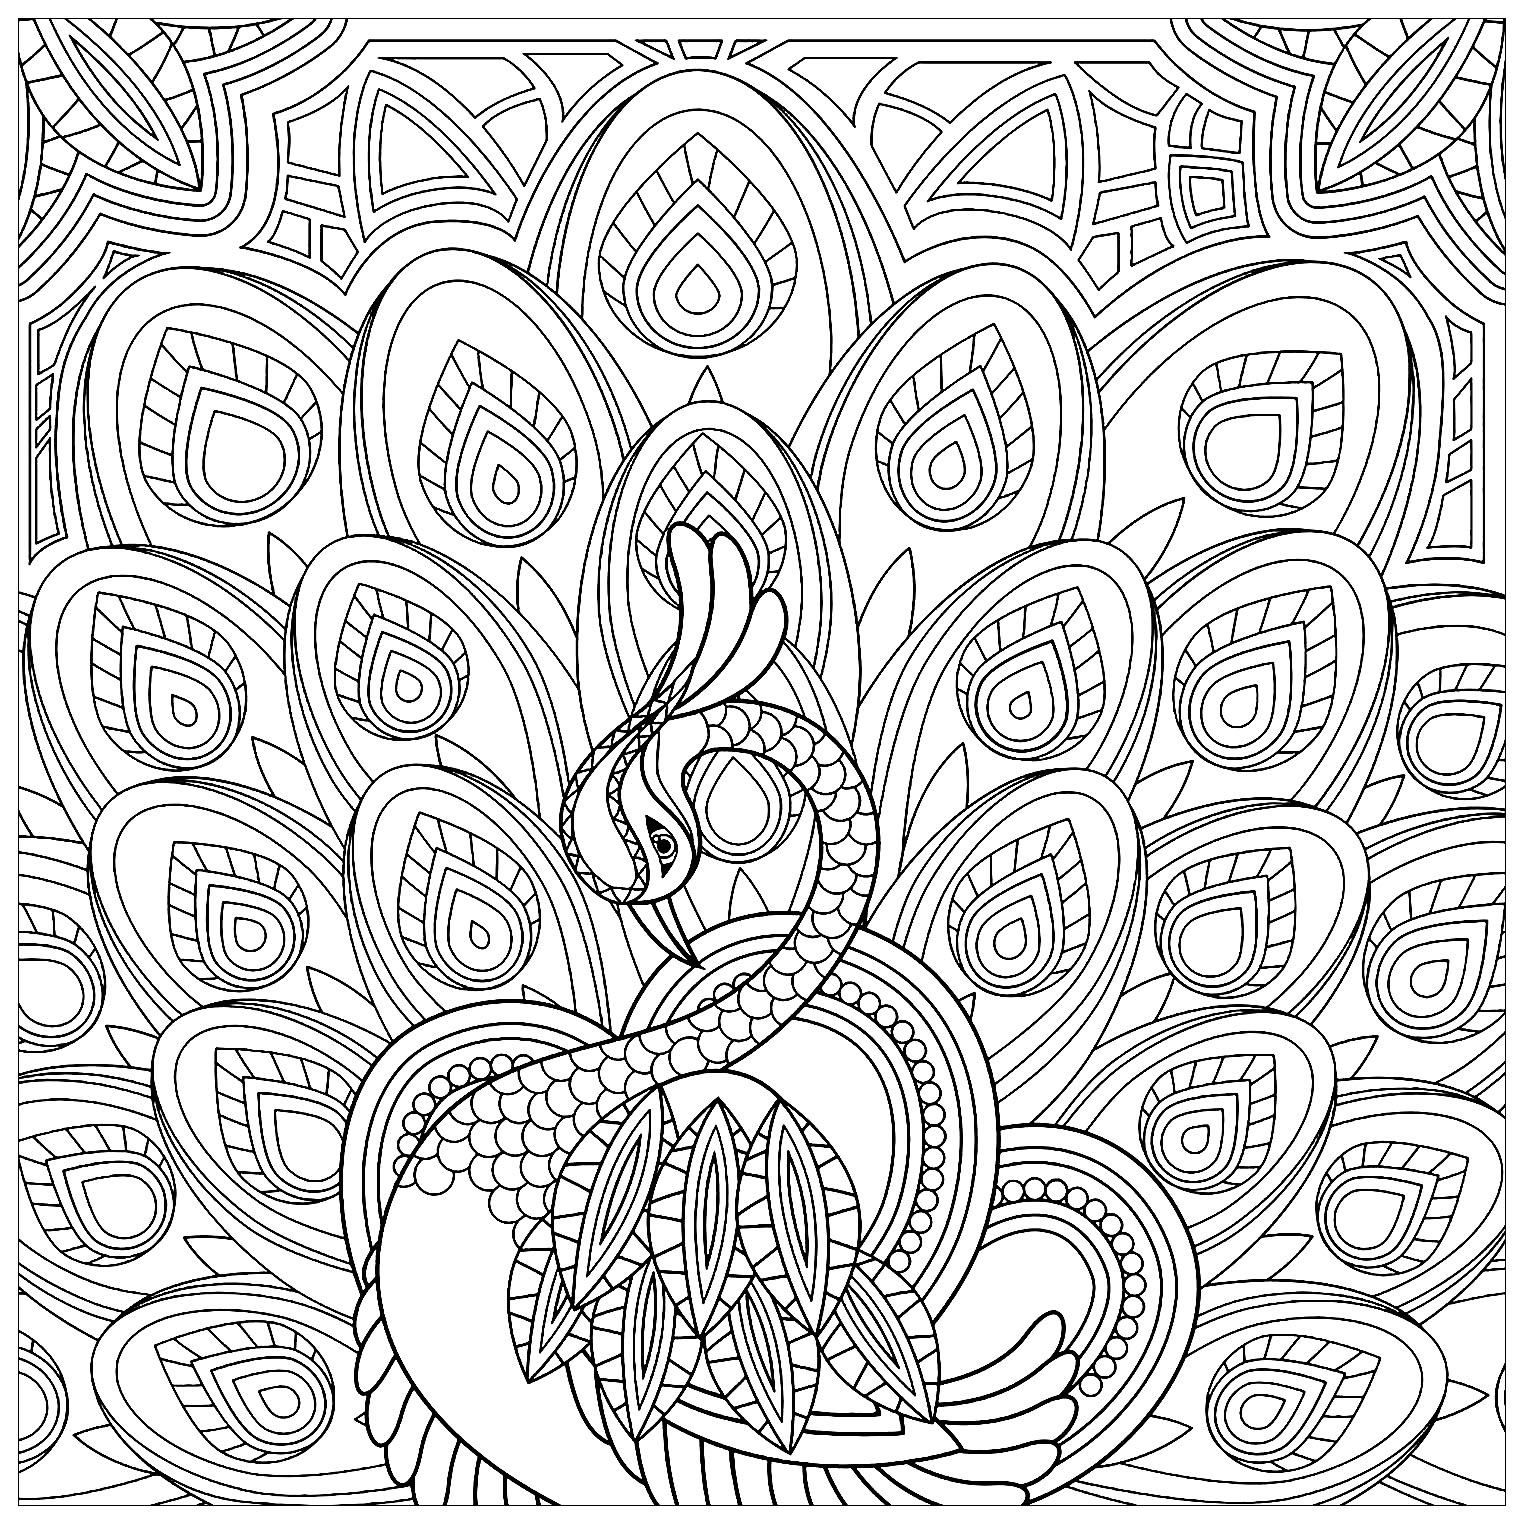 Color this beautiful peacock